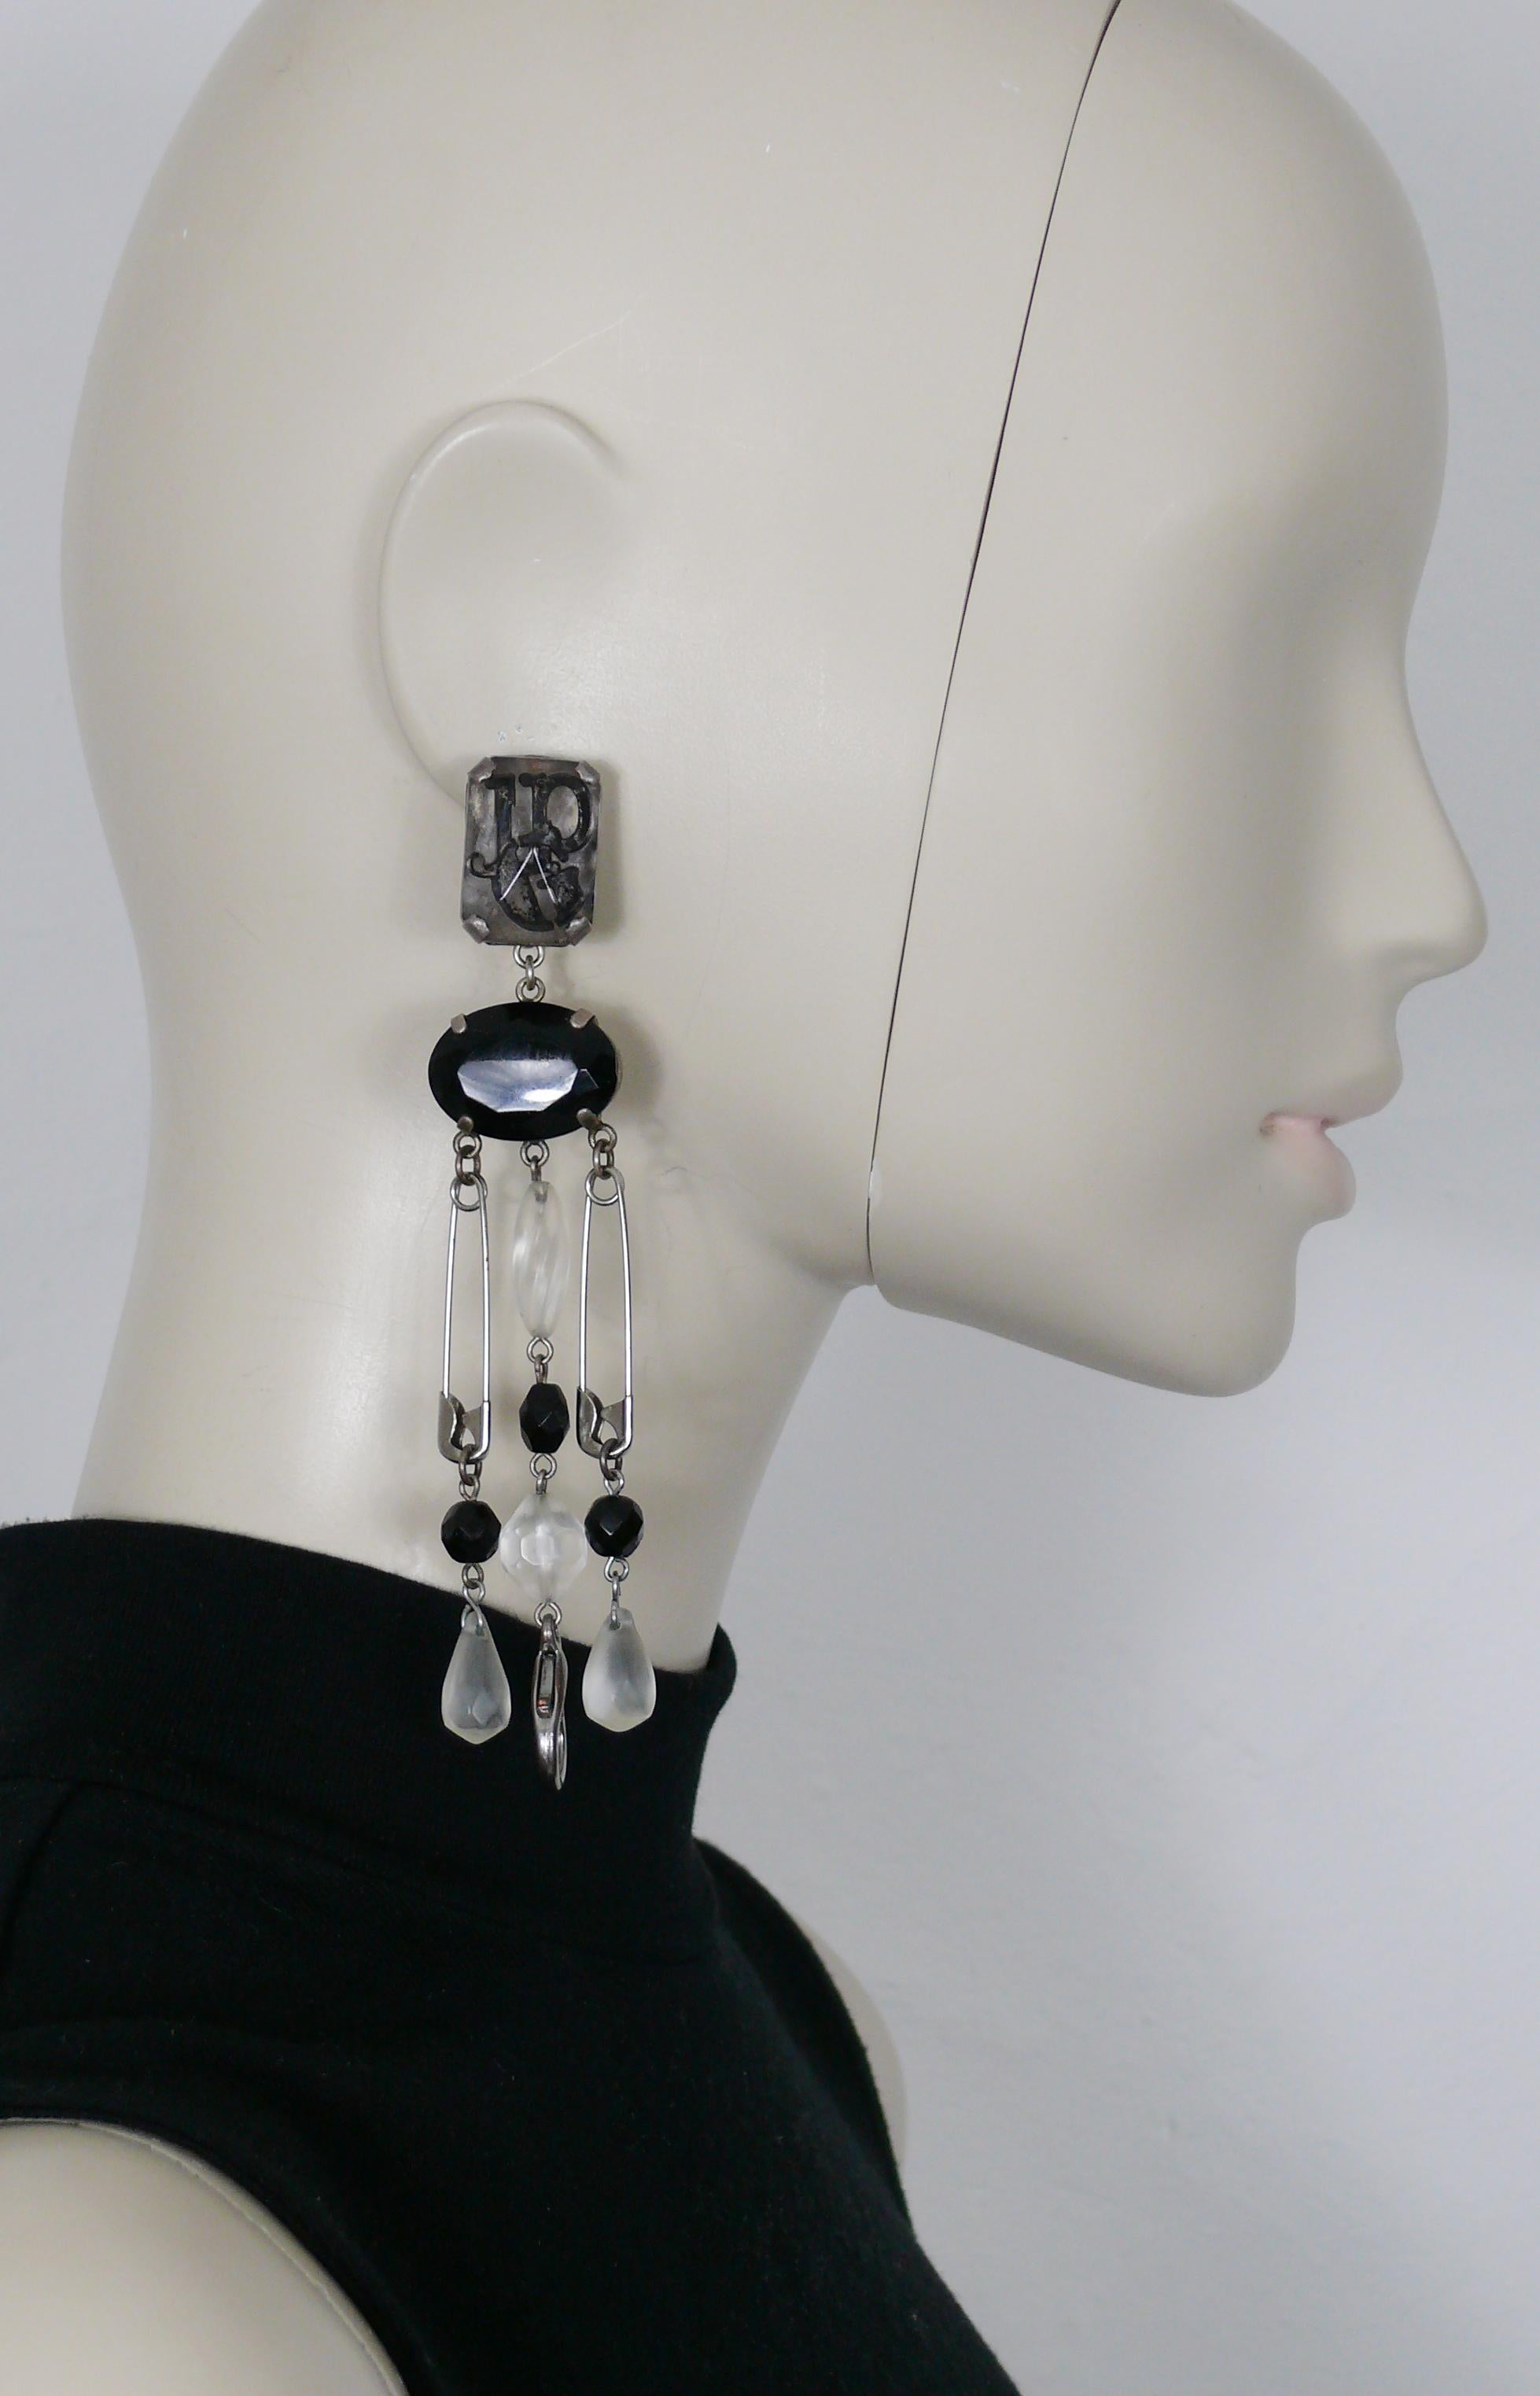 JEAN PAUL GAULTIER vintage punk safety pin shoulder duster dangling earrings (clip-on) featuring JPG logo inlaid resin top, black resin cabochon, black and clear acrylic beads and a large lobster clasp closure.

Silver tone metal hardware.
Antiqued